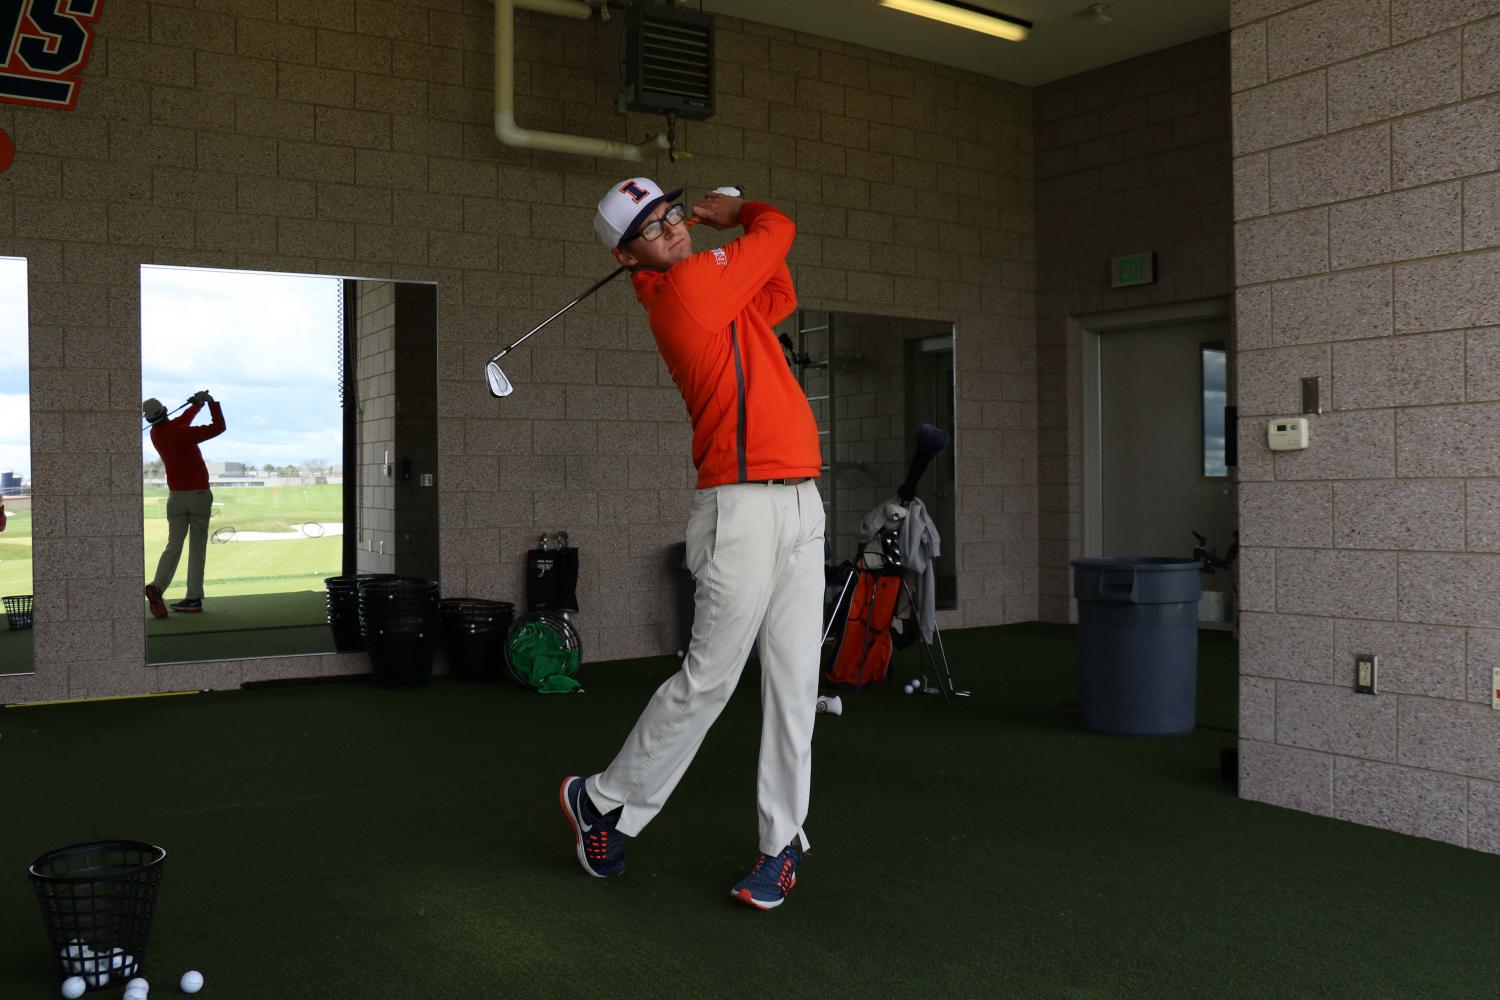 Dylan Meyer takes a practice swing at the Demirjian Golf Practice Facility on April 6. Meyer led the Illini to a Big Ten championship last weekend.